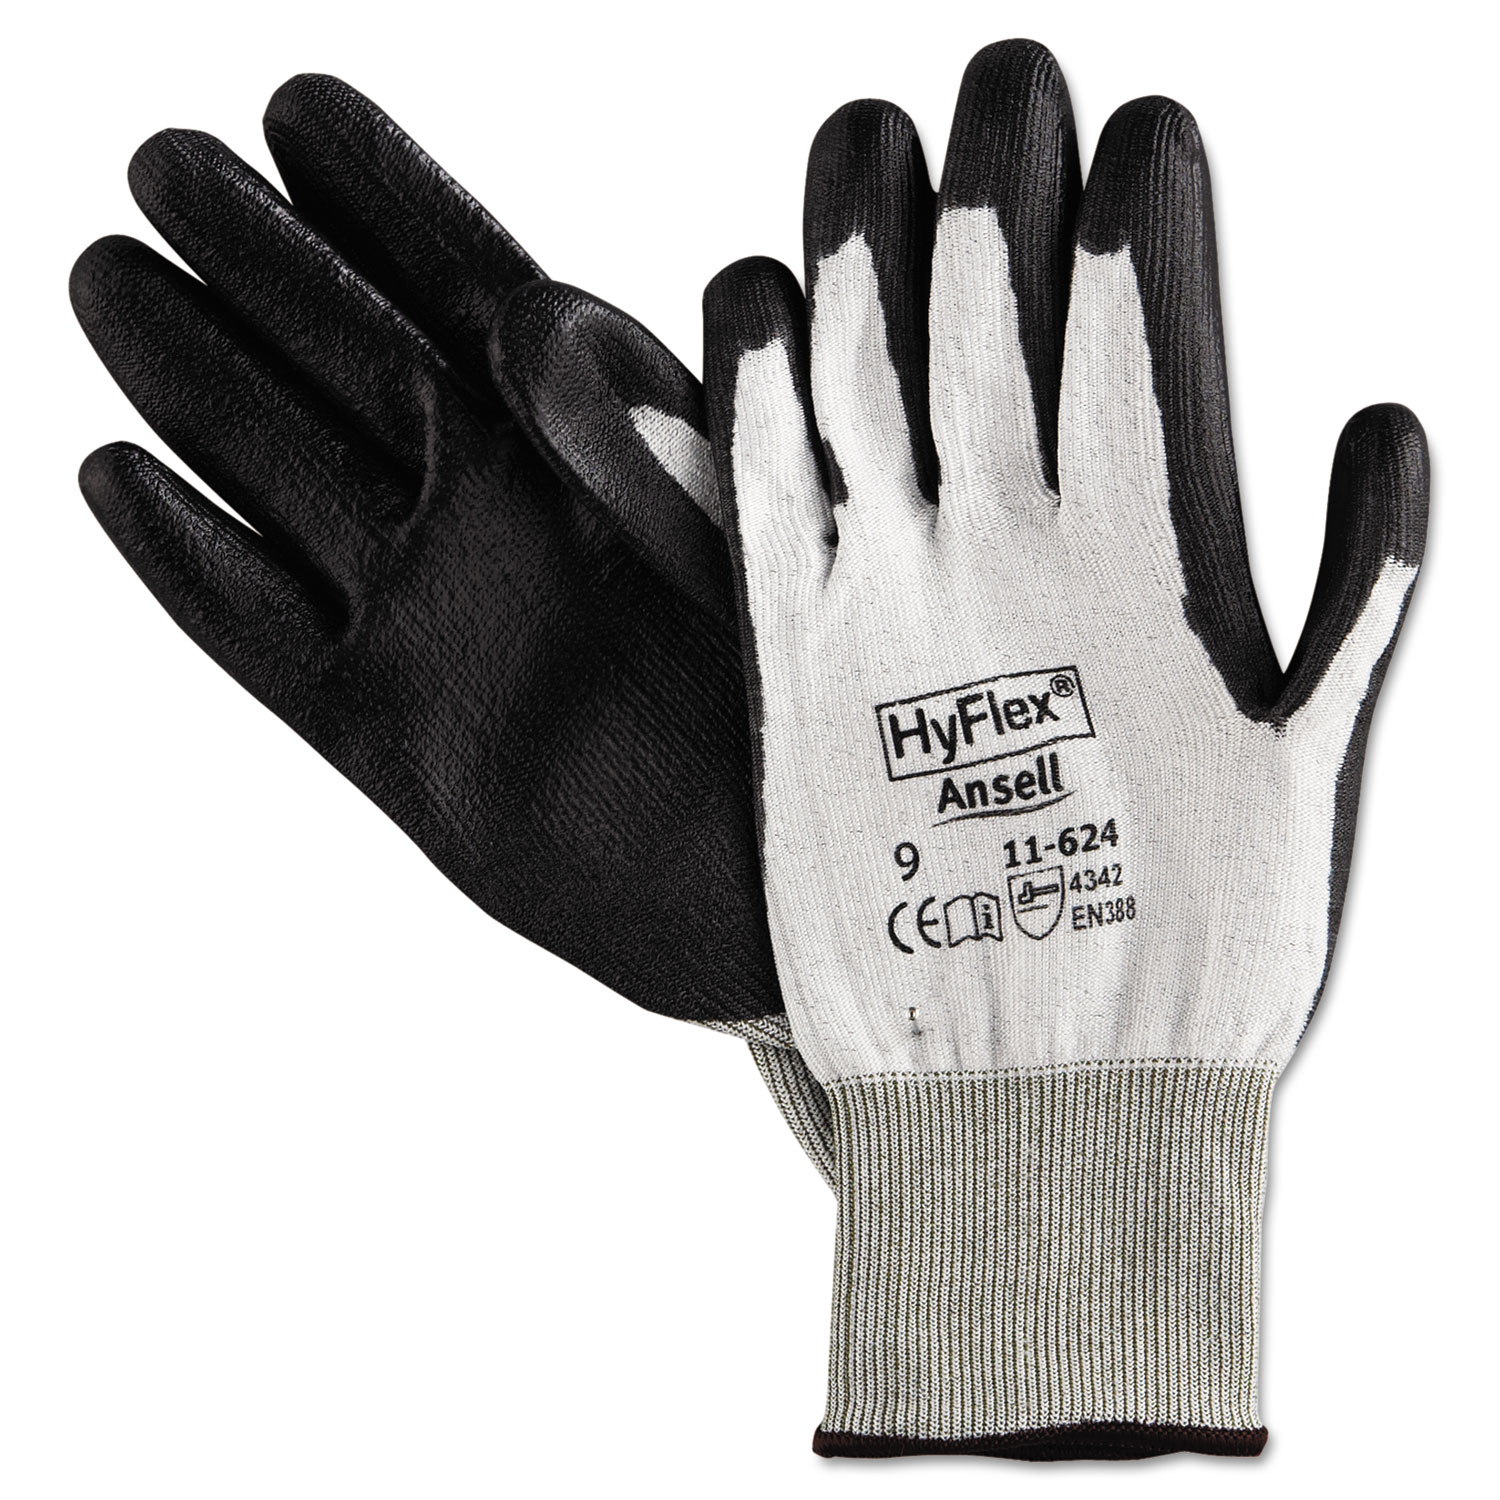  AnsellPro 104780 HyFlex Dyneema Cut-Protection Gloves, Gray, Size 9, 12 Pairs (ANS116249) 